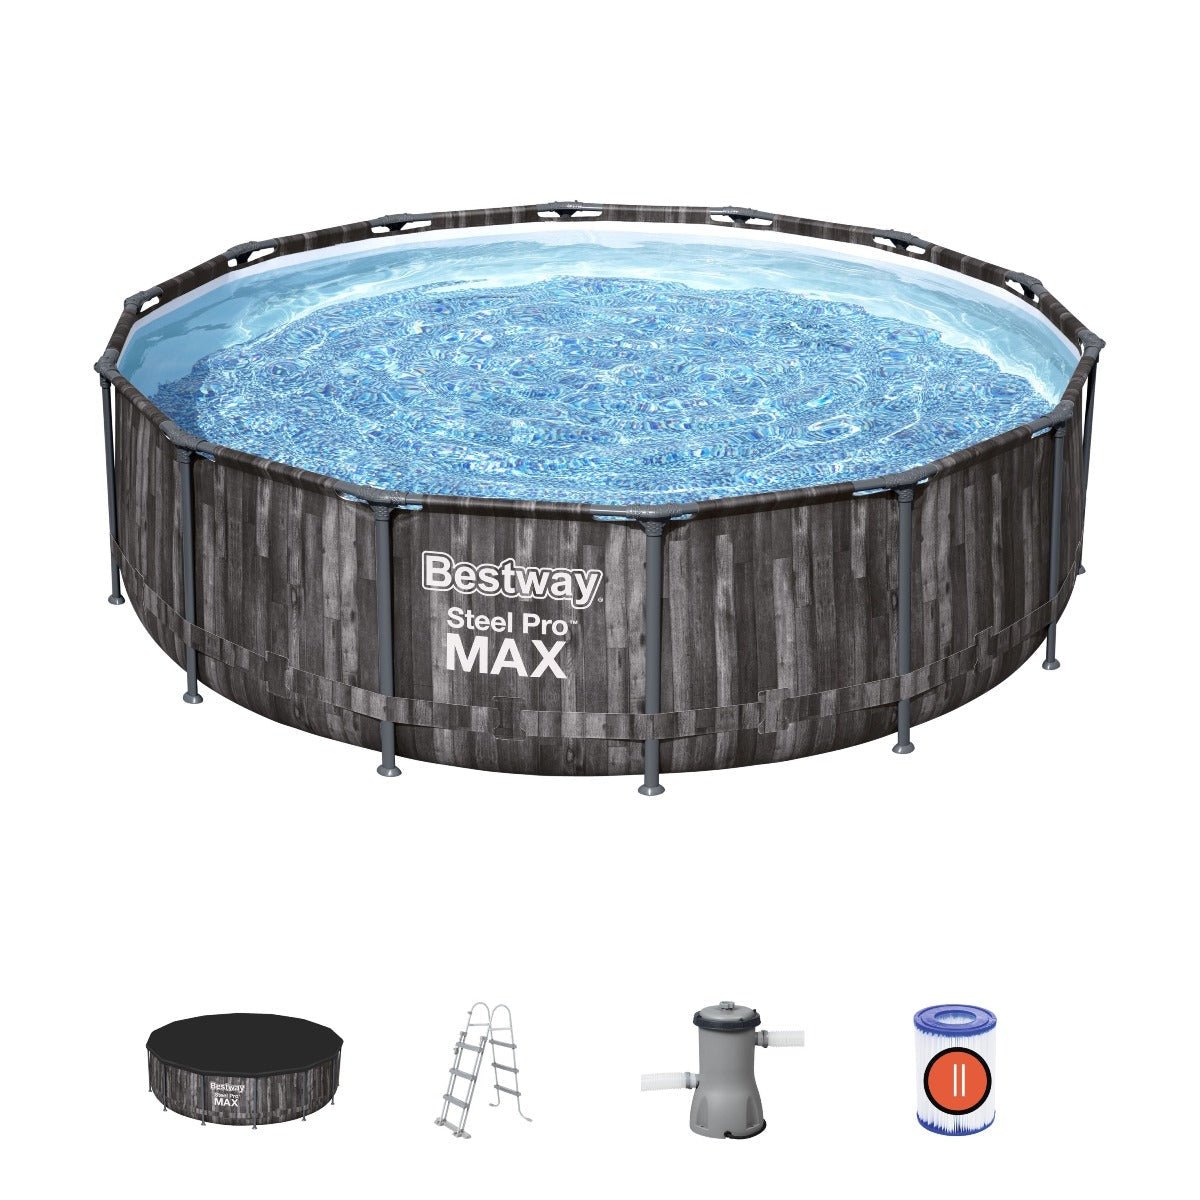 Pool Max 14ft 42in x Pro Steel Above Ground Bestway Swimming